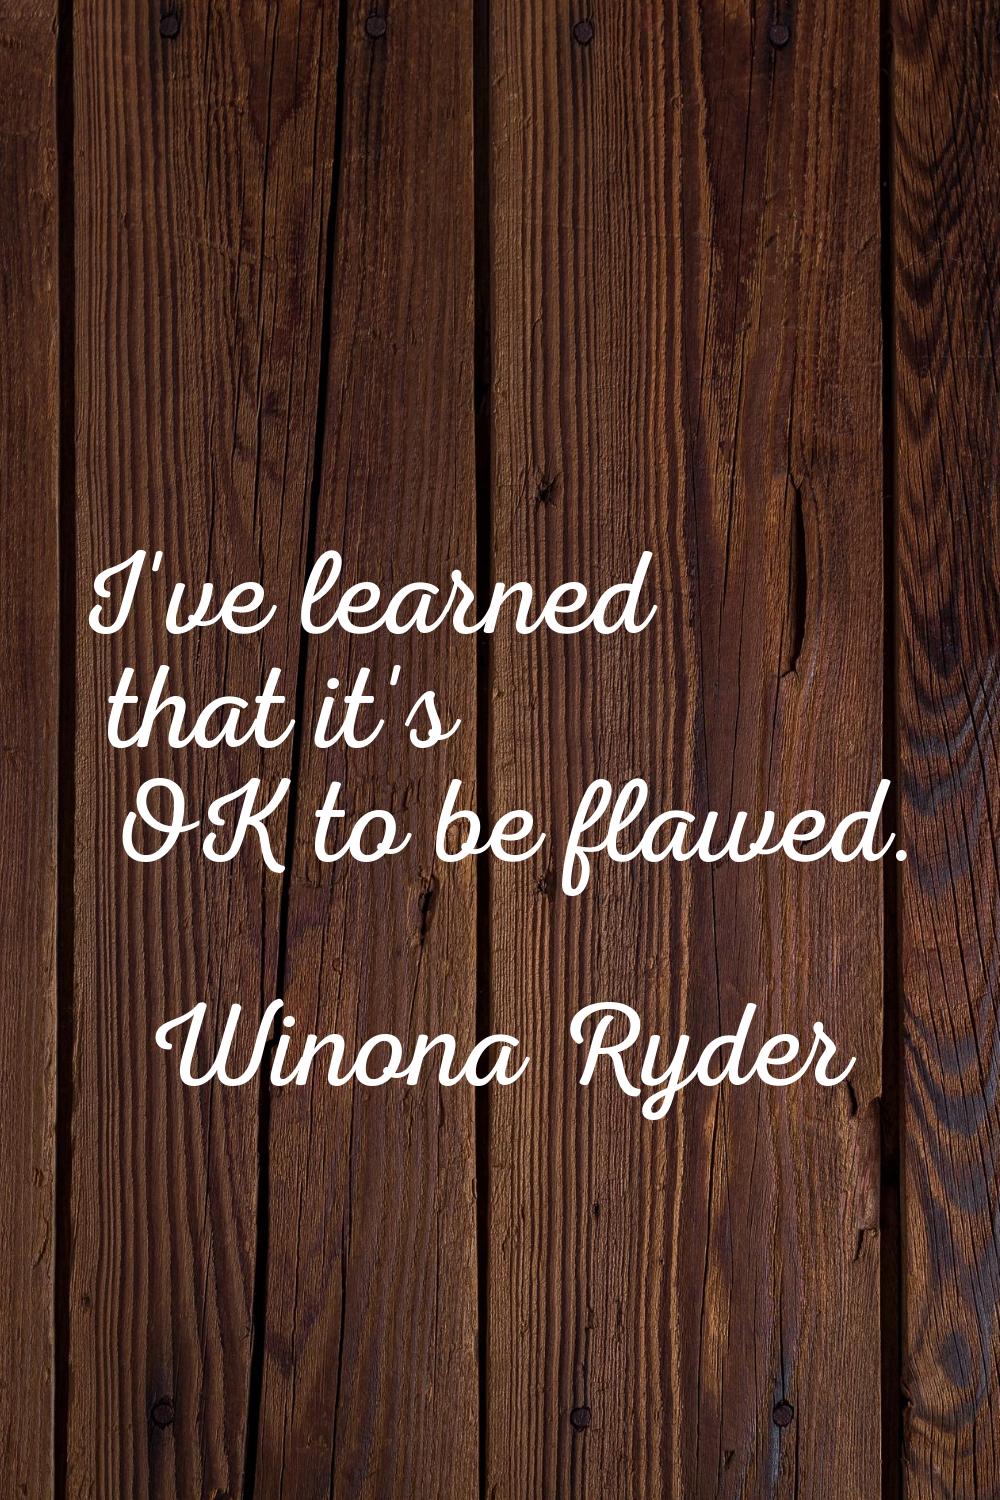 I've learned that it's OK to be flawed.